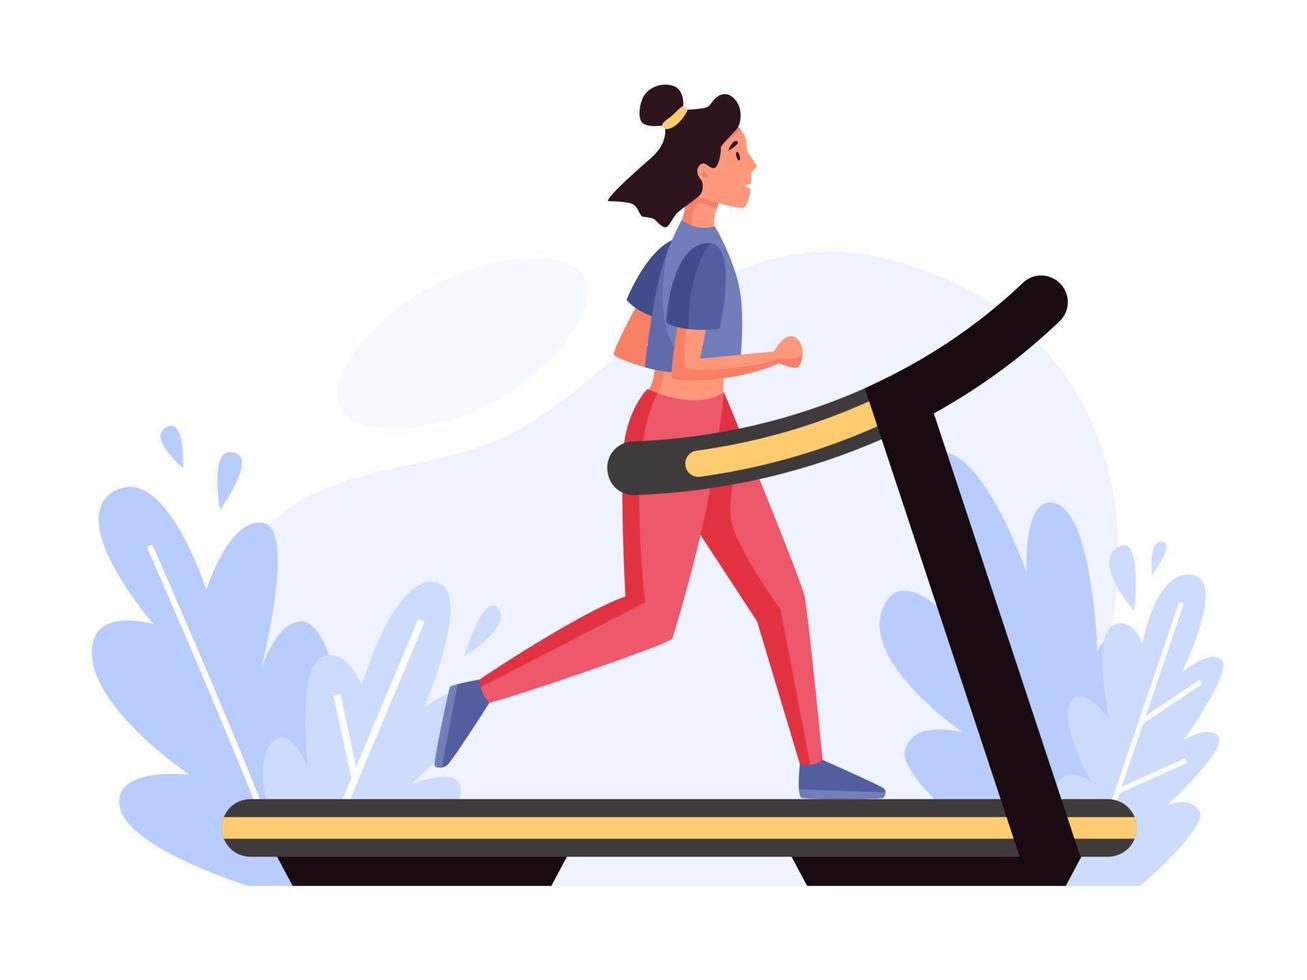 Athletic woman running on the treadmill. Concept illustration of actives, sport, cardio, gym. Vector flat illustration.